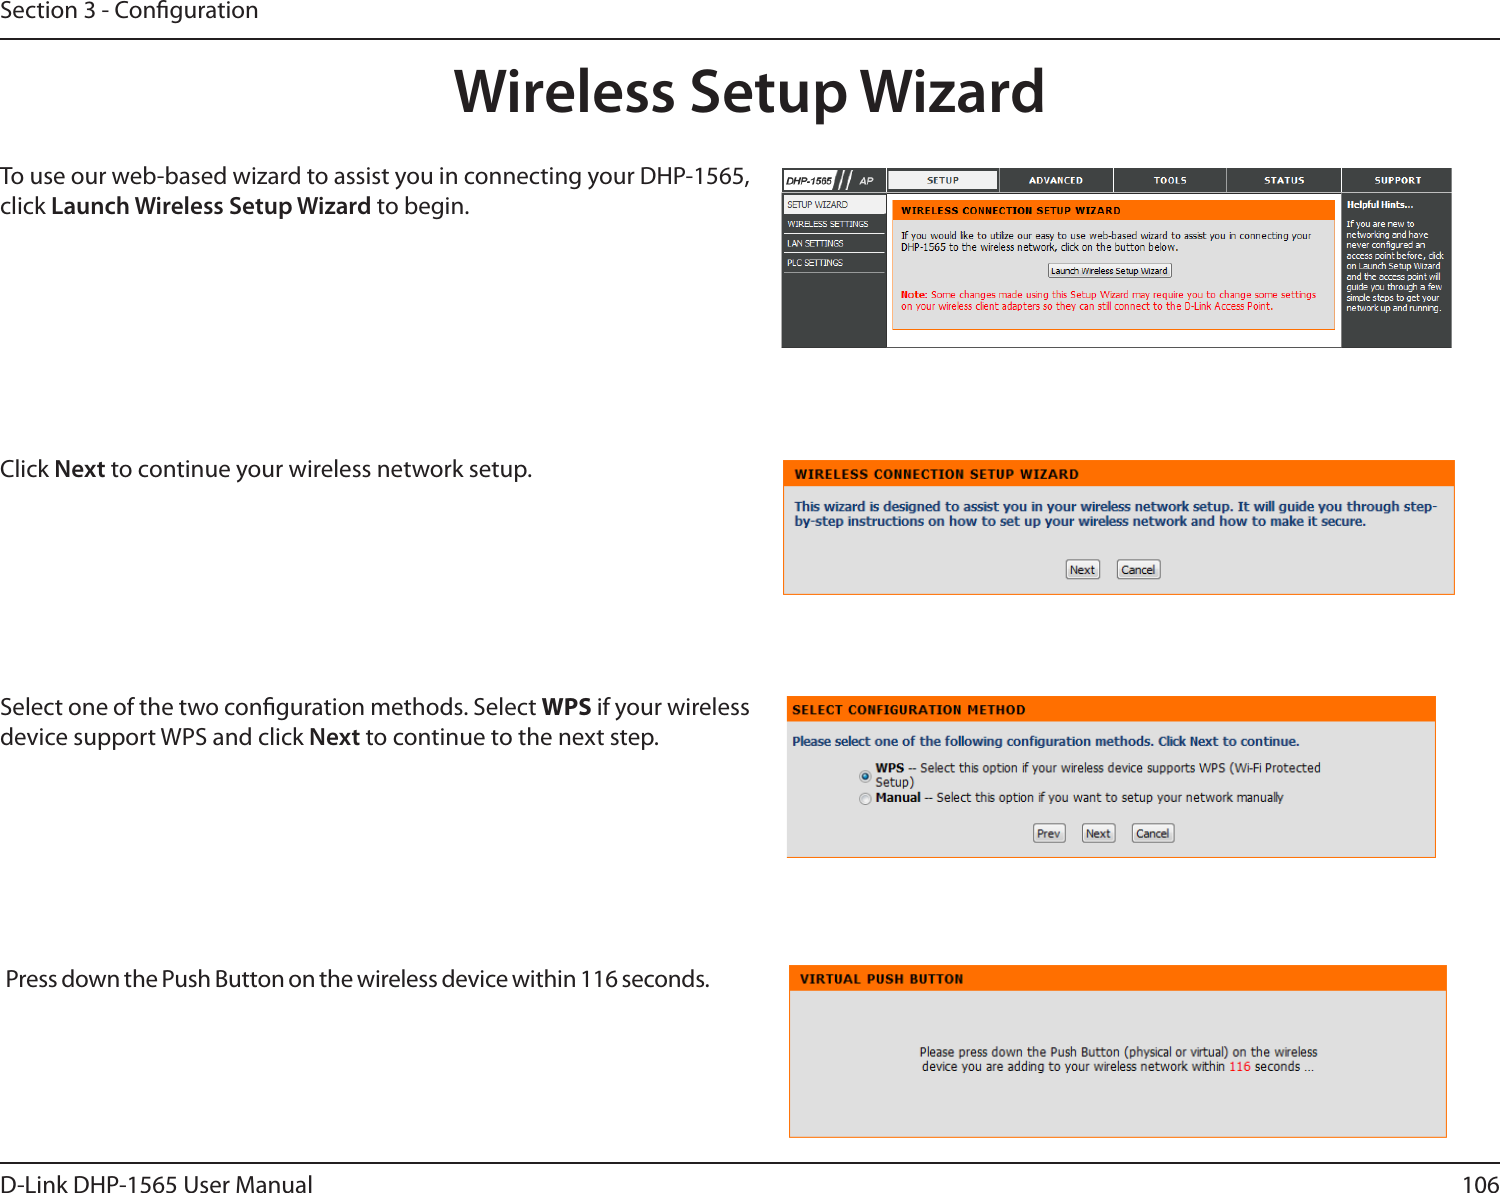 106D-Link DHP-1565 User ManualSection 3 - CongurationWireless Setup WizardTo use our web-based wizard to assist you in connecting your DHP-1565, click Launch Wireless Setup Wizard to begin. Click Next to continue your wireless network setup. Select one of the two conguration methods. Select WPS if your wireless device support WPS and click Next to continue to the next step. Press down the Push Button on the wireless device within 116 seconds. 